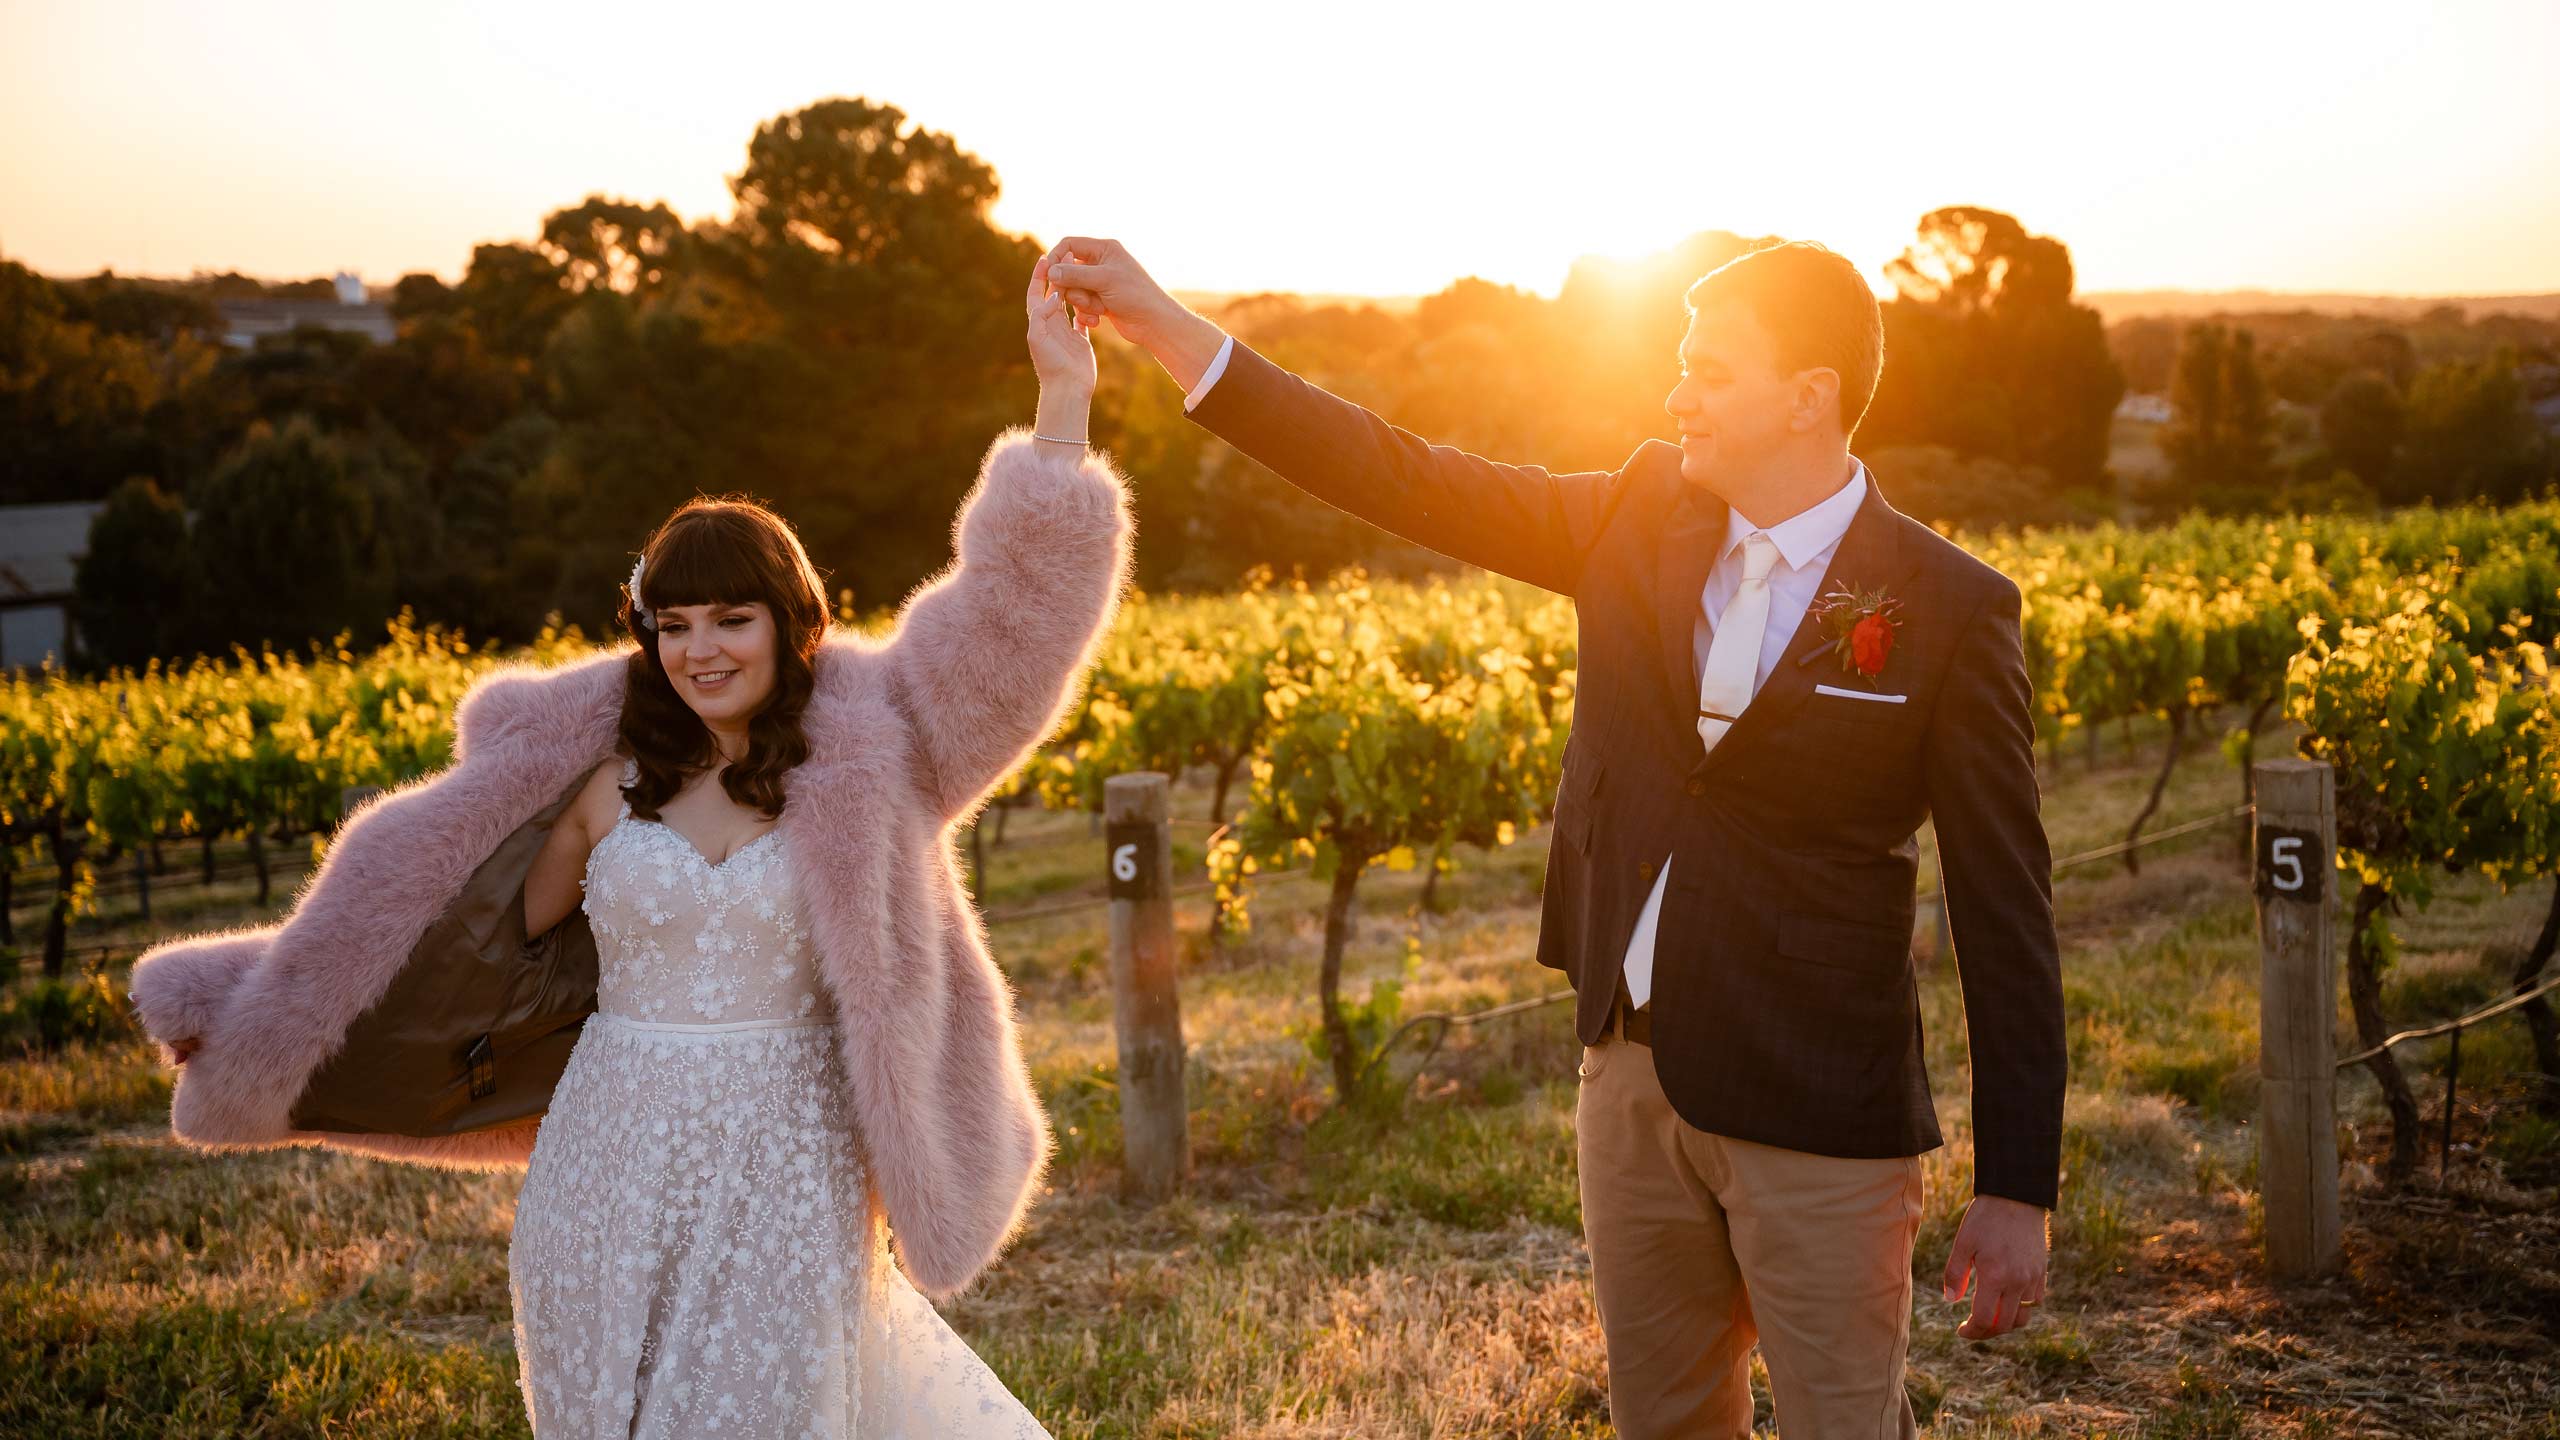 Couples dances at sunset in a vineyard, shot by Adelaide wedding videography team wilson & lewis Photography